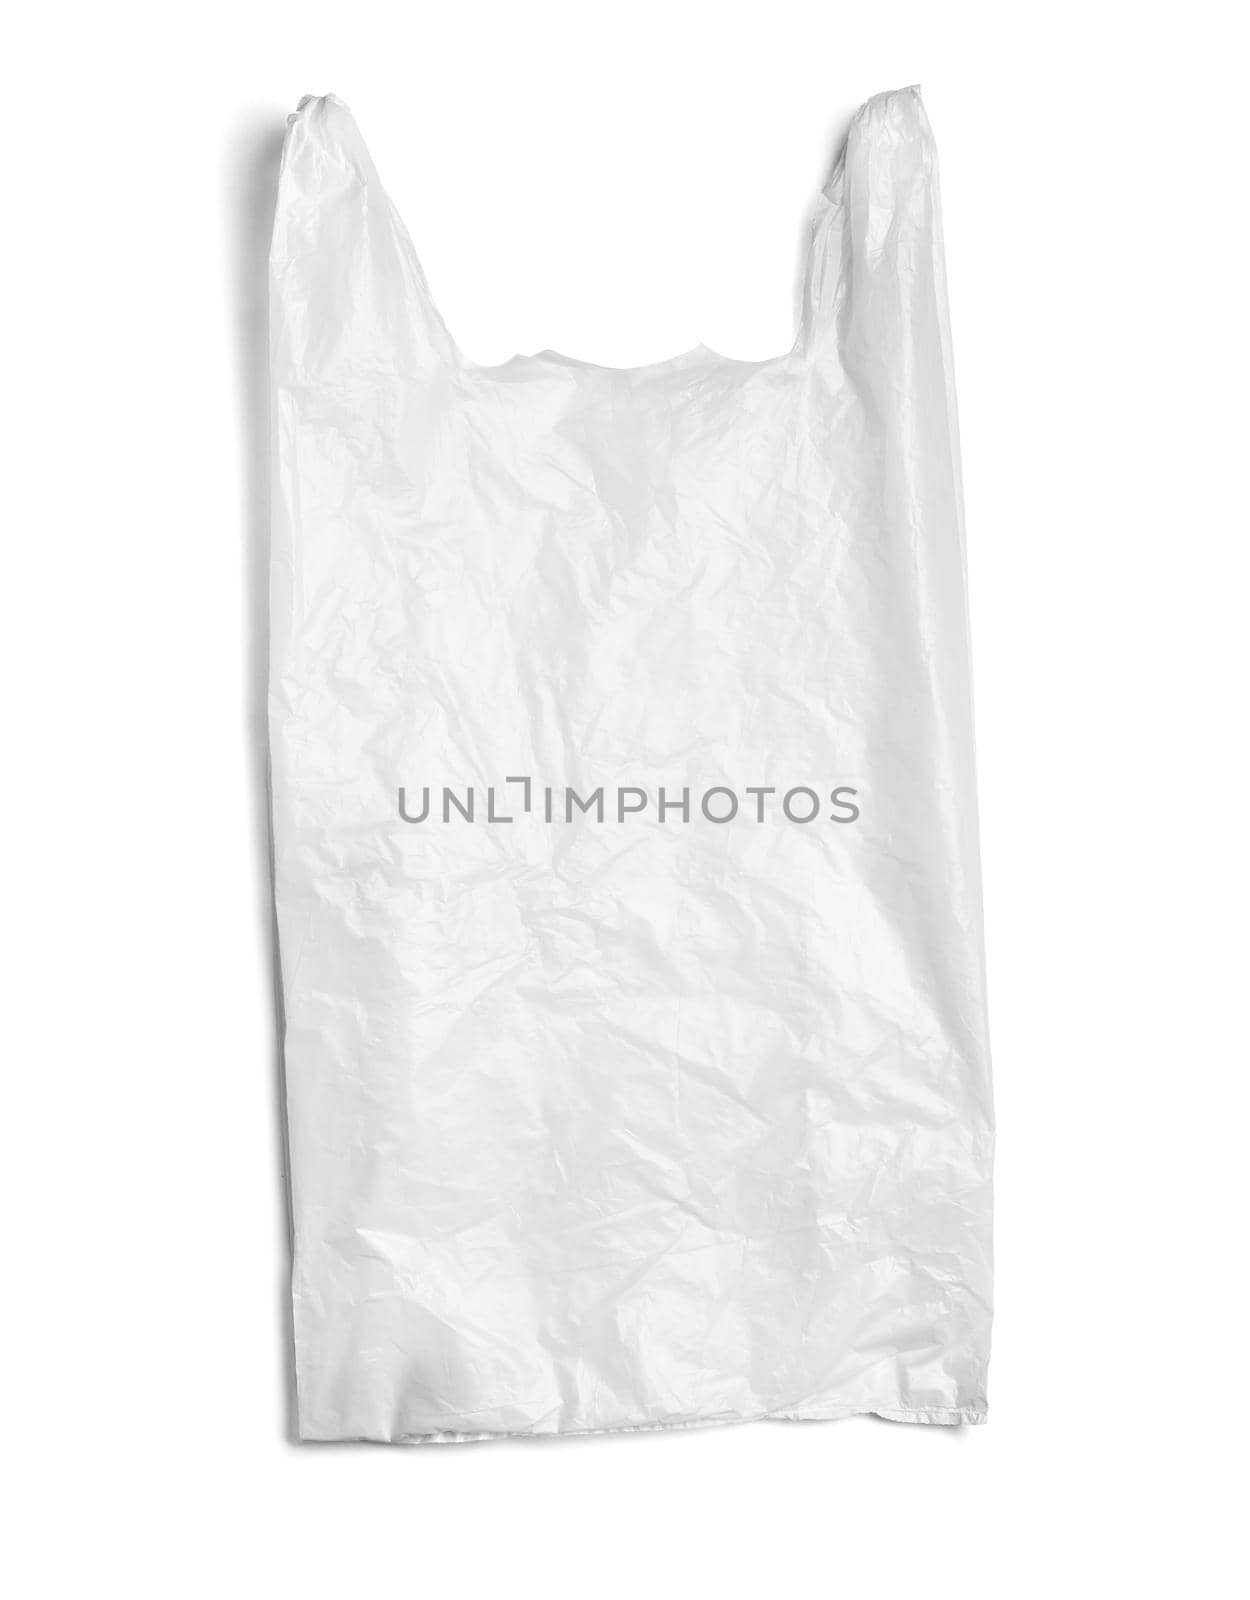 close up of a used white plastic bag on white background